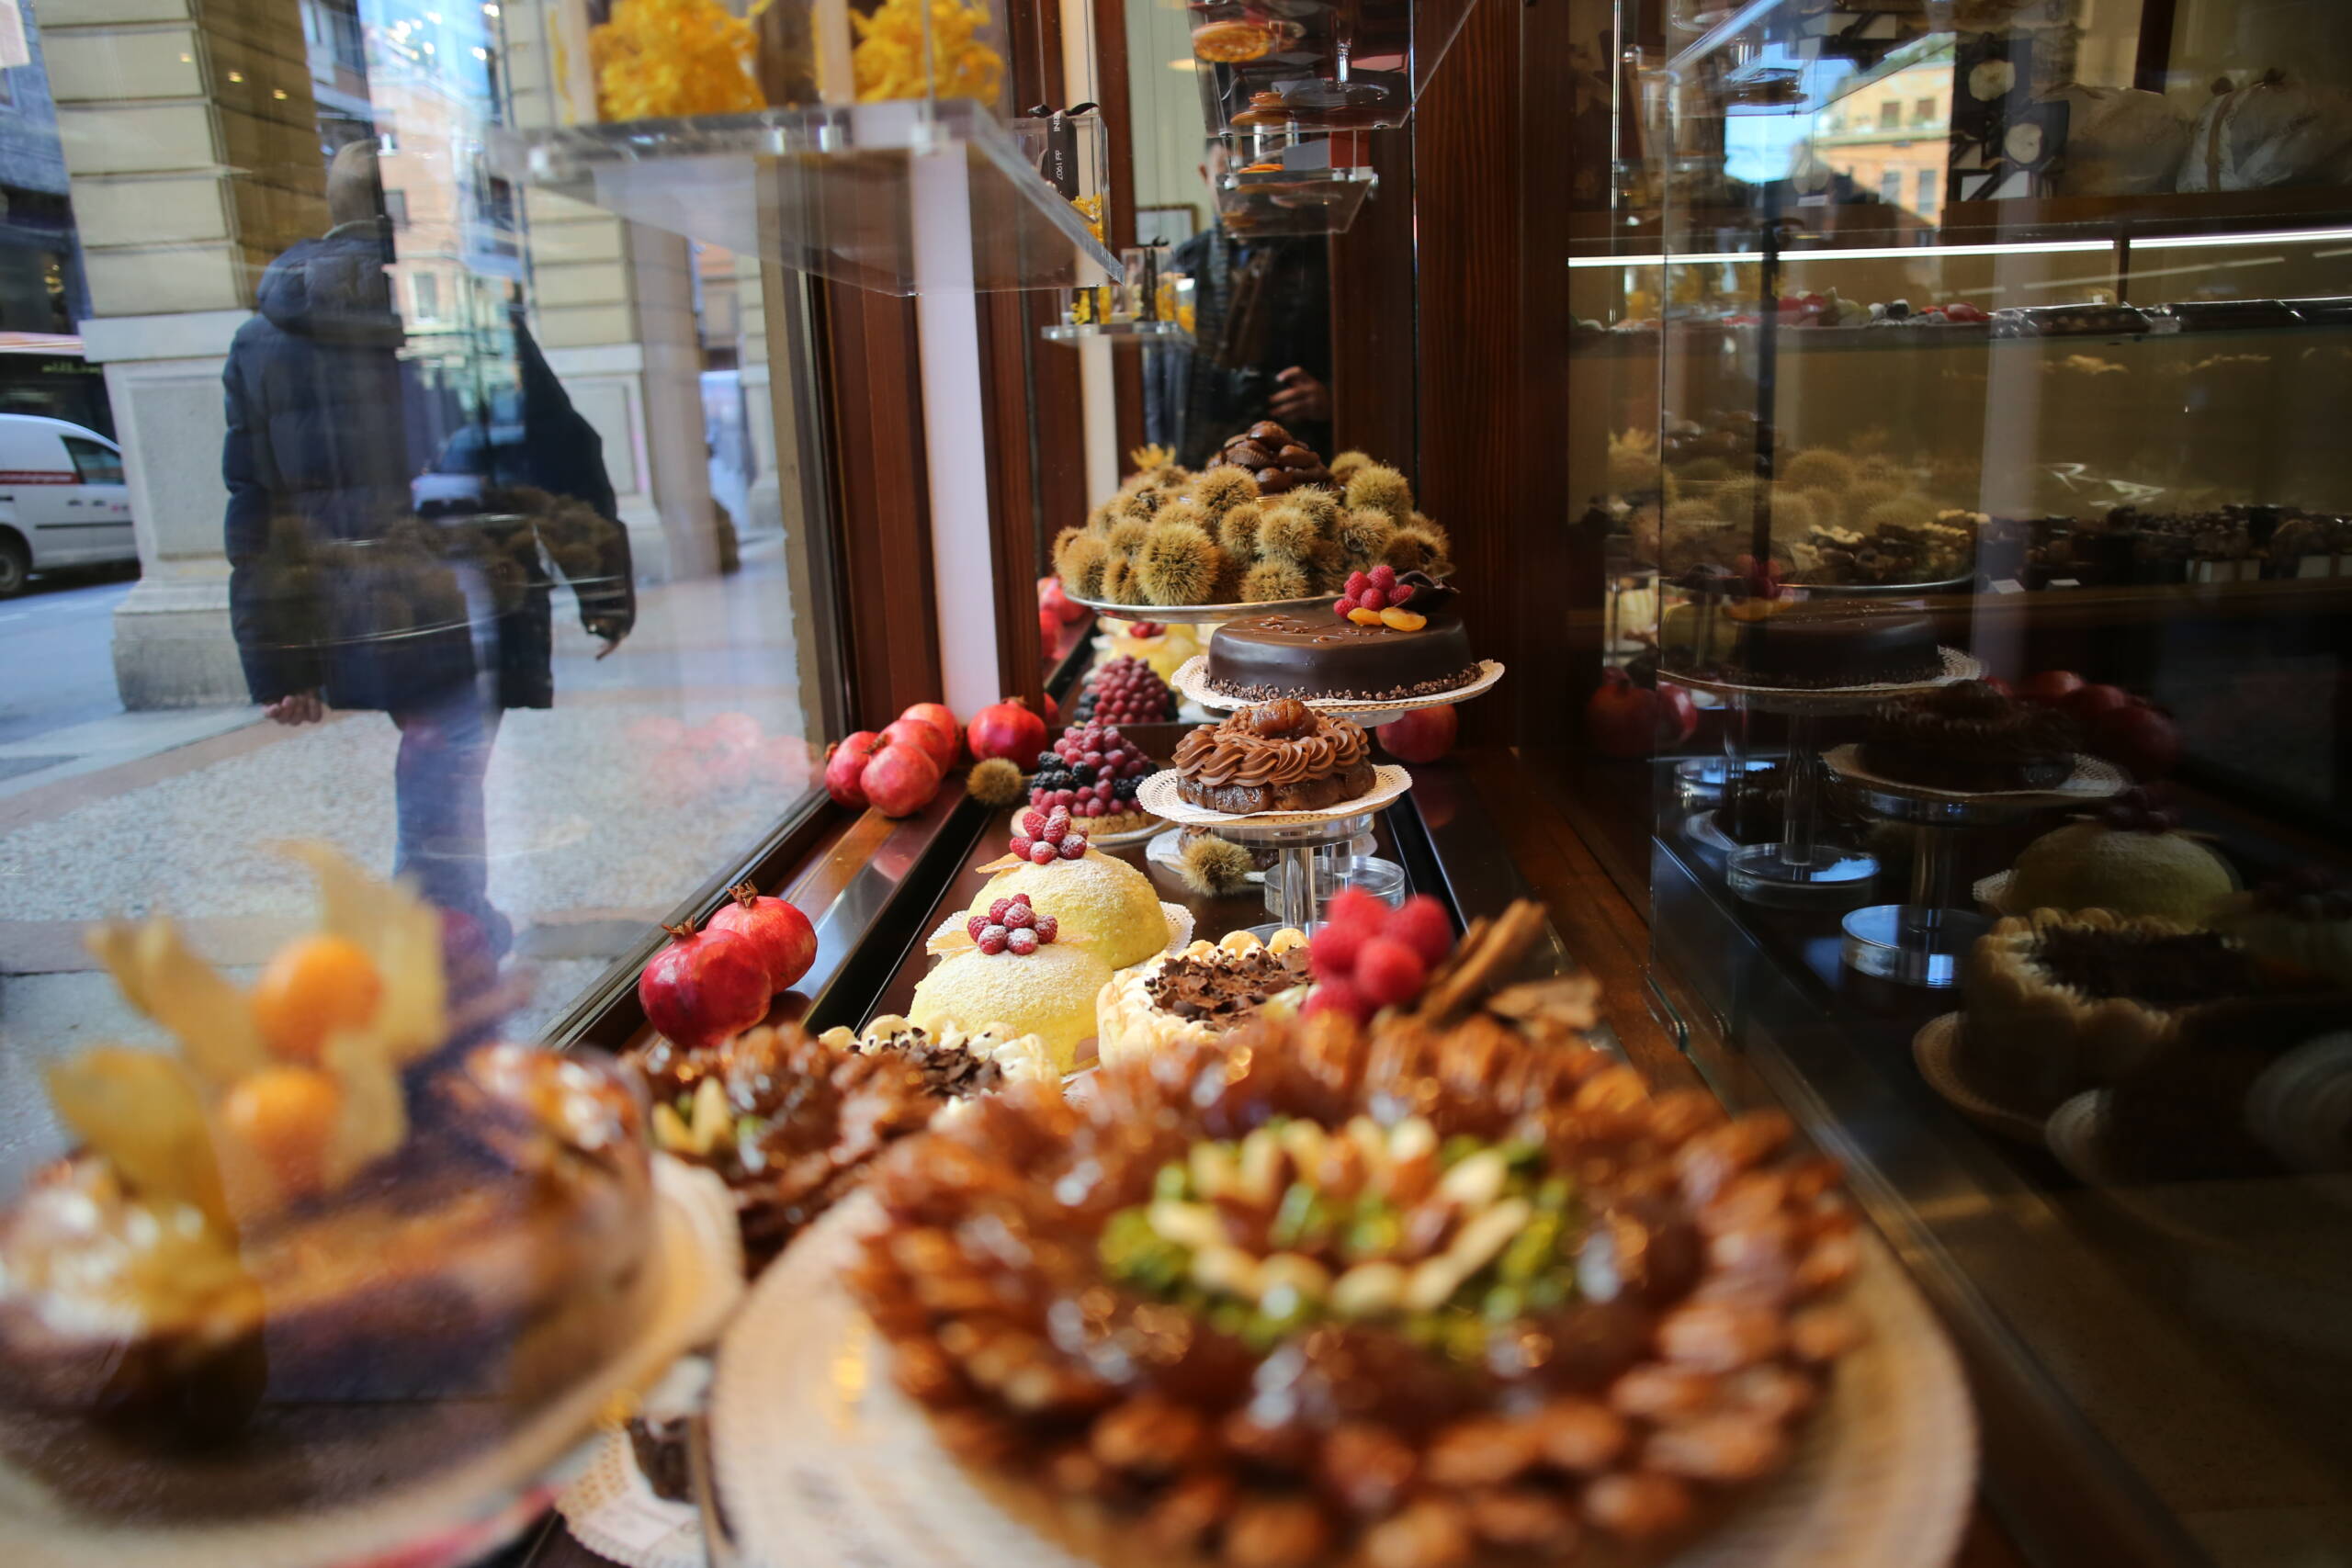 A Journey into the Allure of a European Bakery